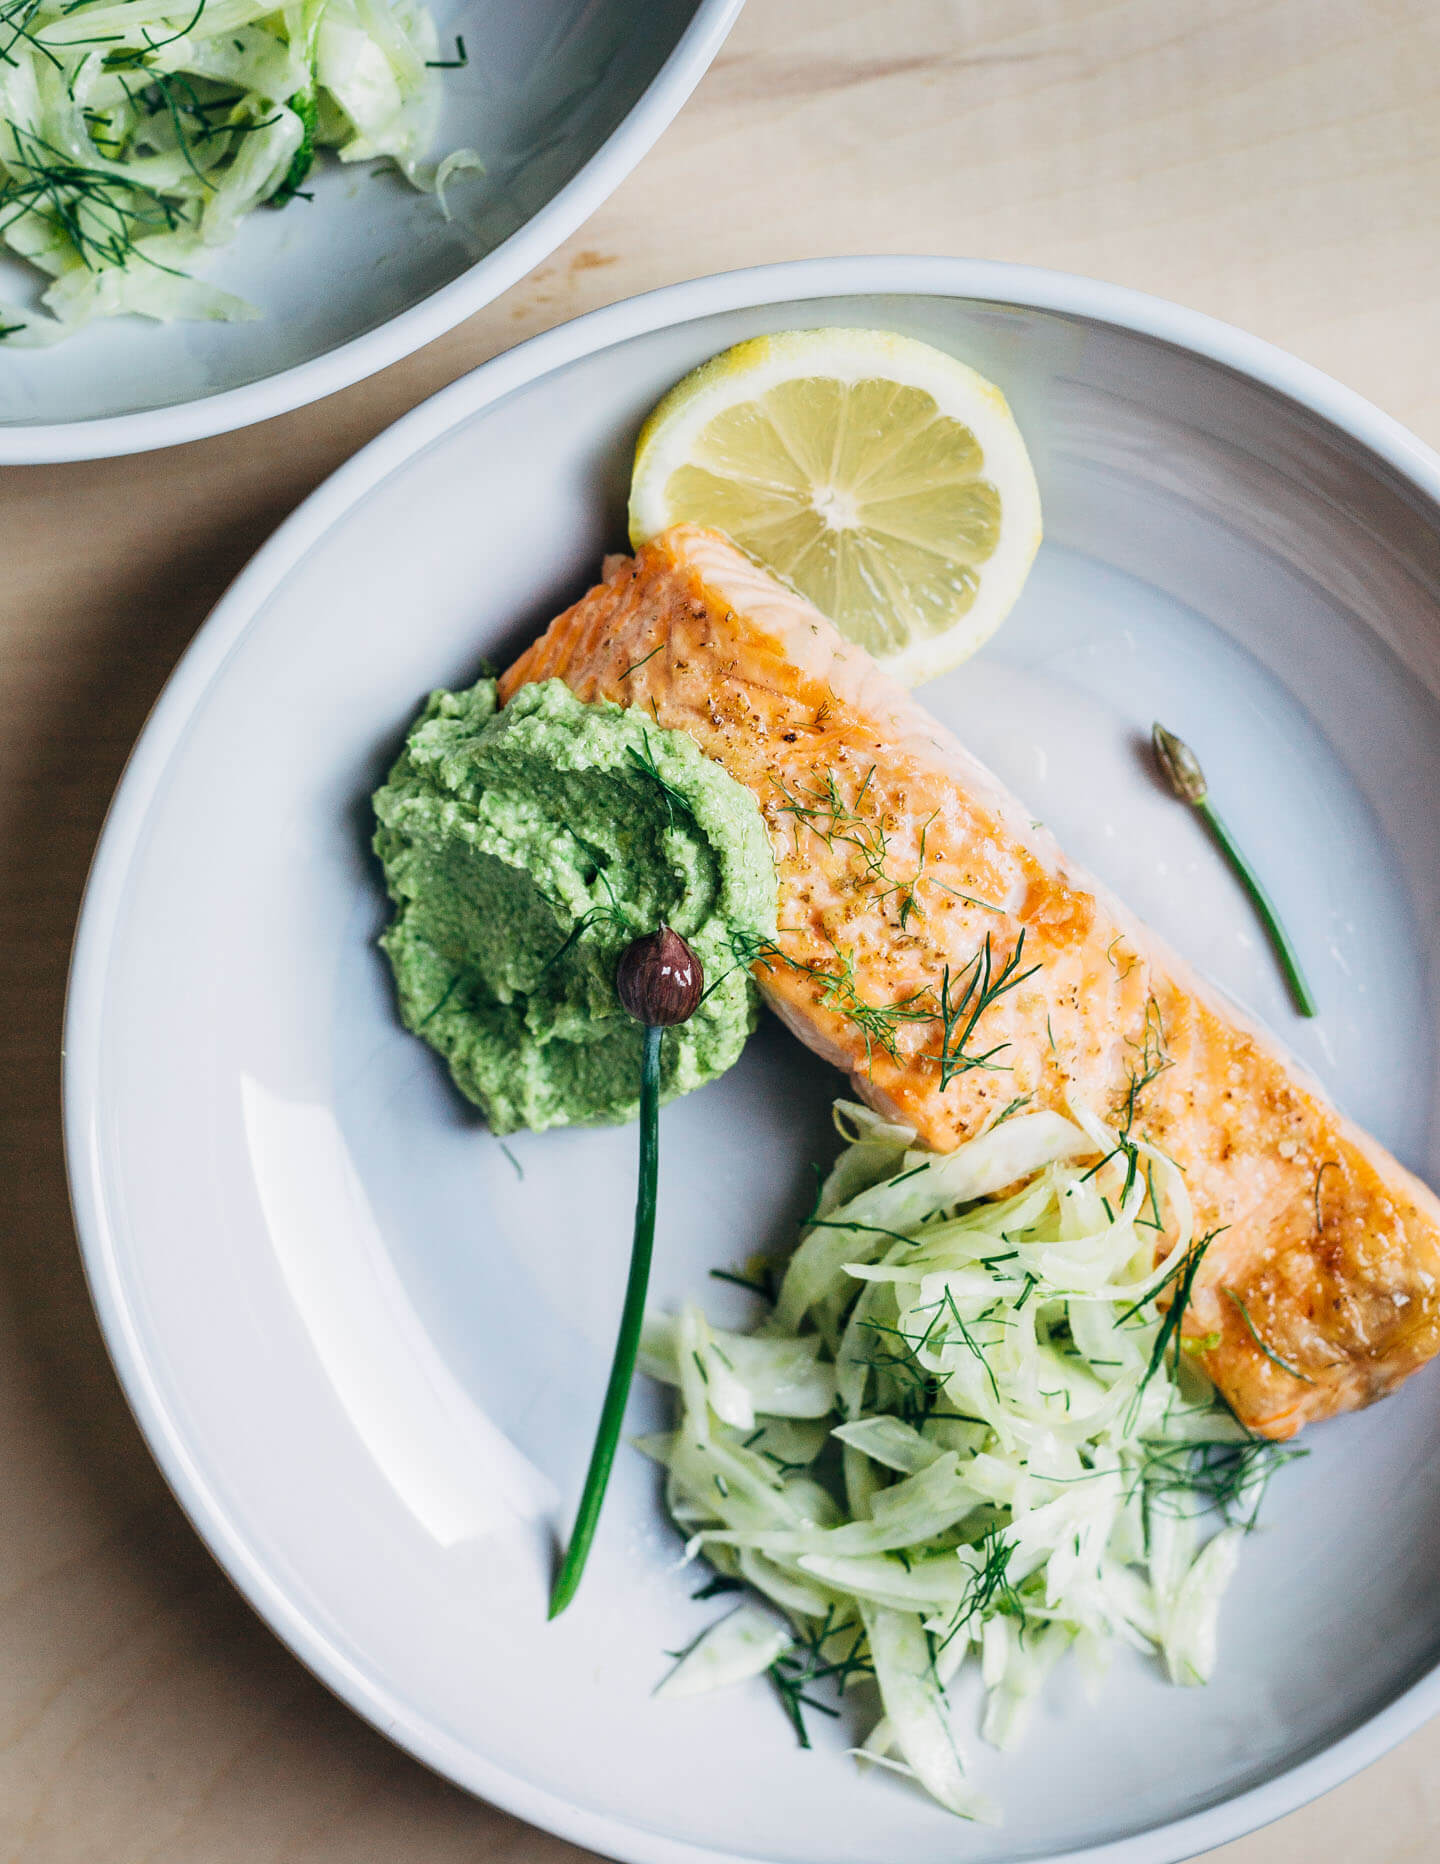 A creamy, mild asparagus pesto that tastes like spring! Made with garden chives, soaked sunflower seeds, and Parmesan, it's perfect served alongside broiled salmon and lemony fennel slaw. 